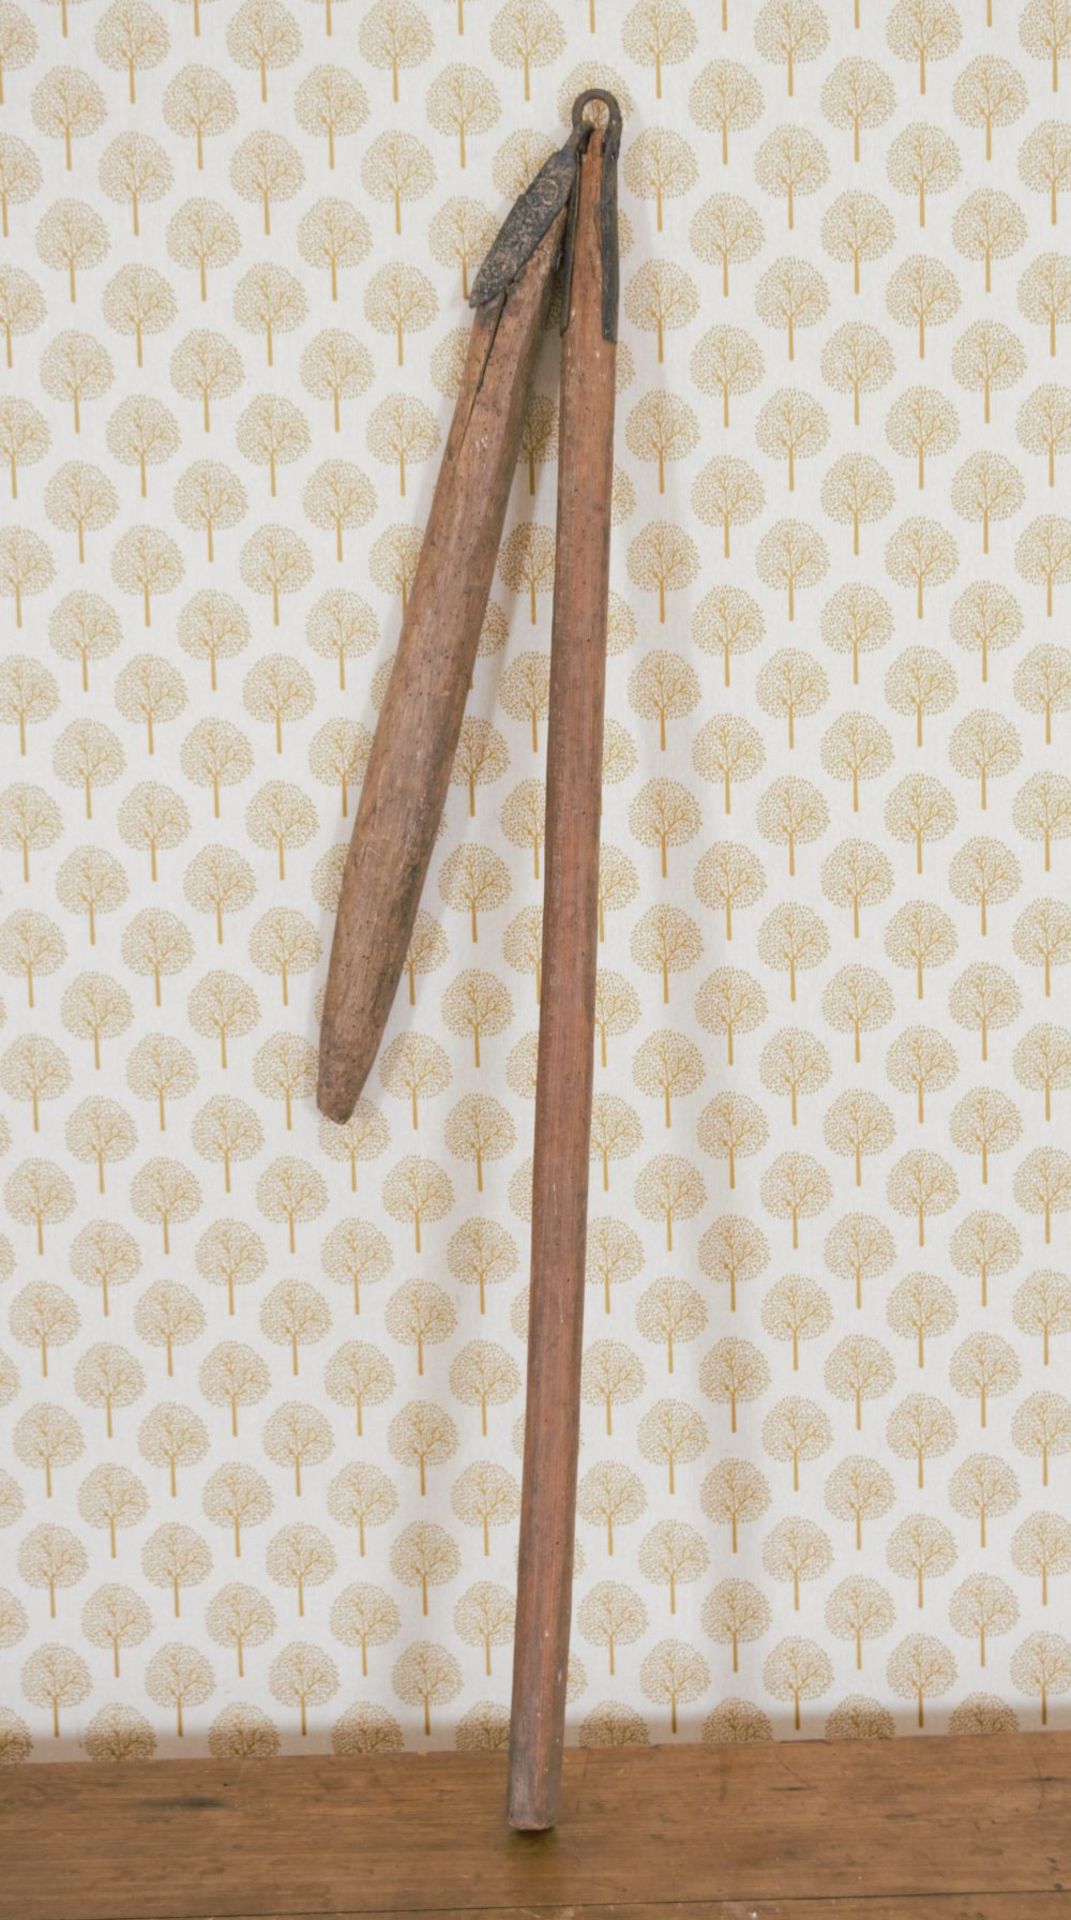 19TH-CENTURY PINE FLAX FLAIL - Image 2 of 2